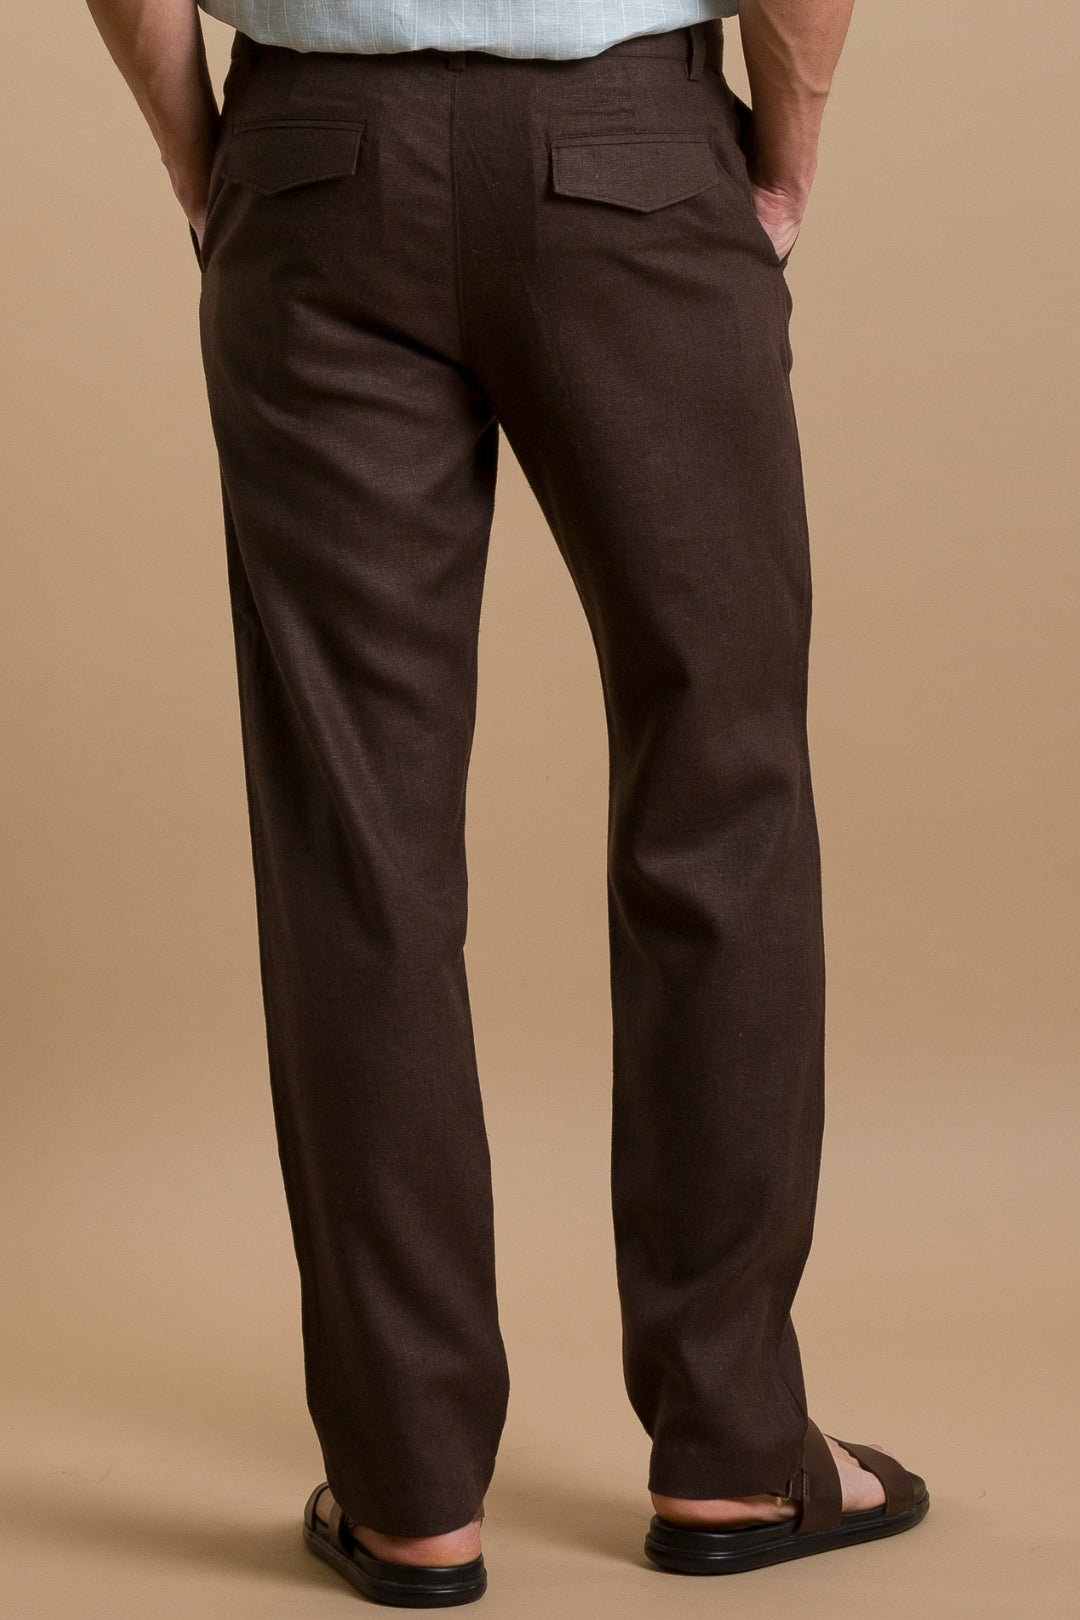 Brown linen trousers